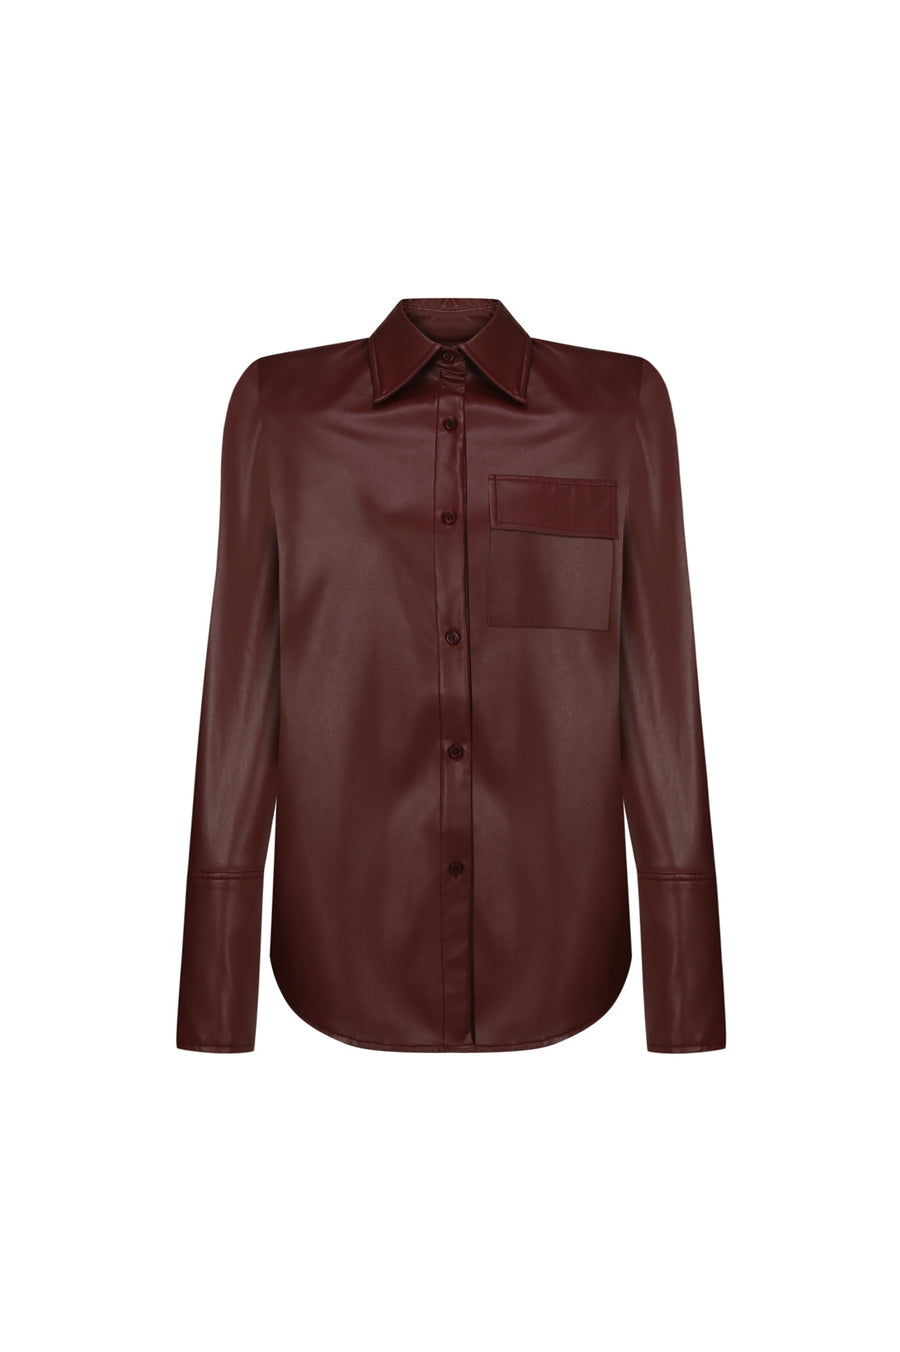 The Orfeo burgundy leather suit